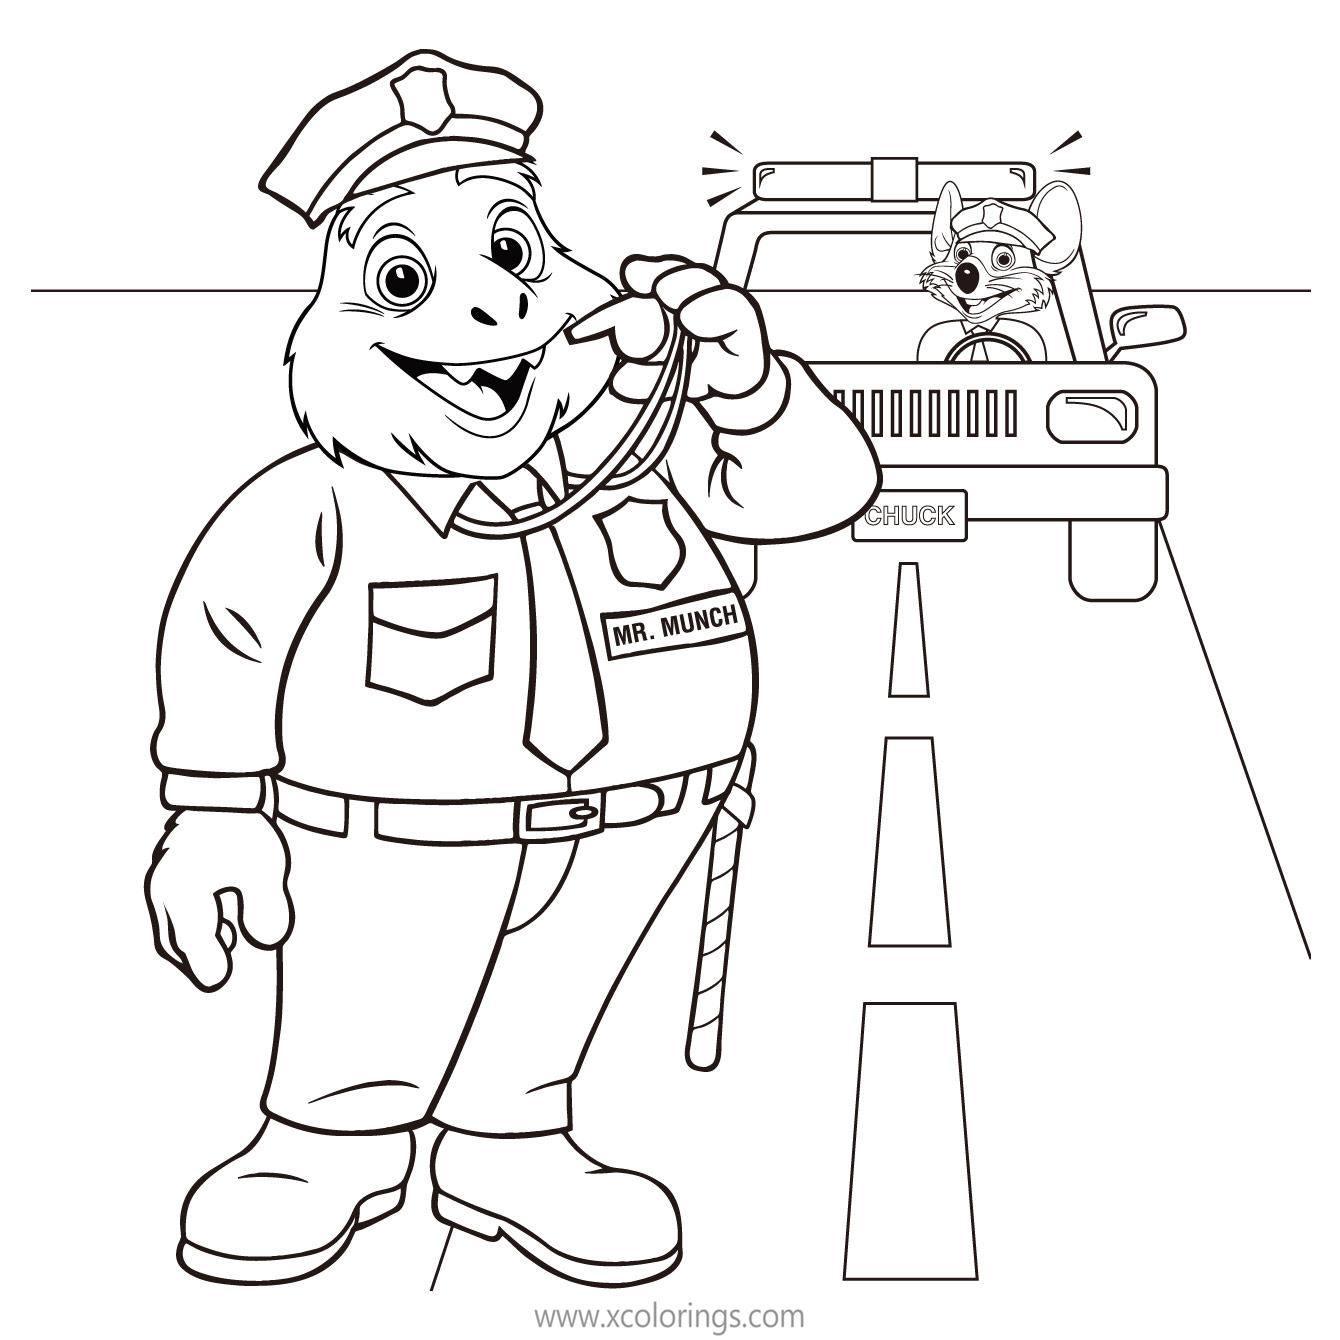 Free Chuck E Cheese Coloring Pages Police printable